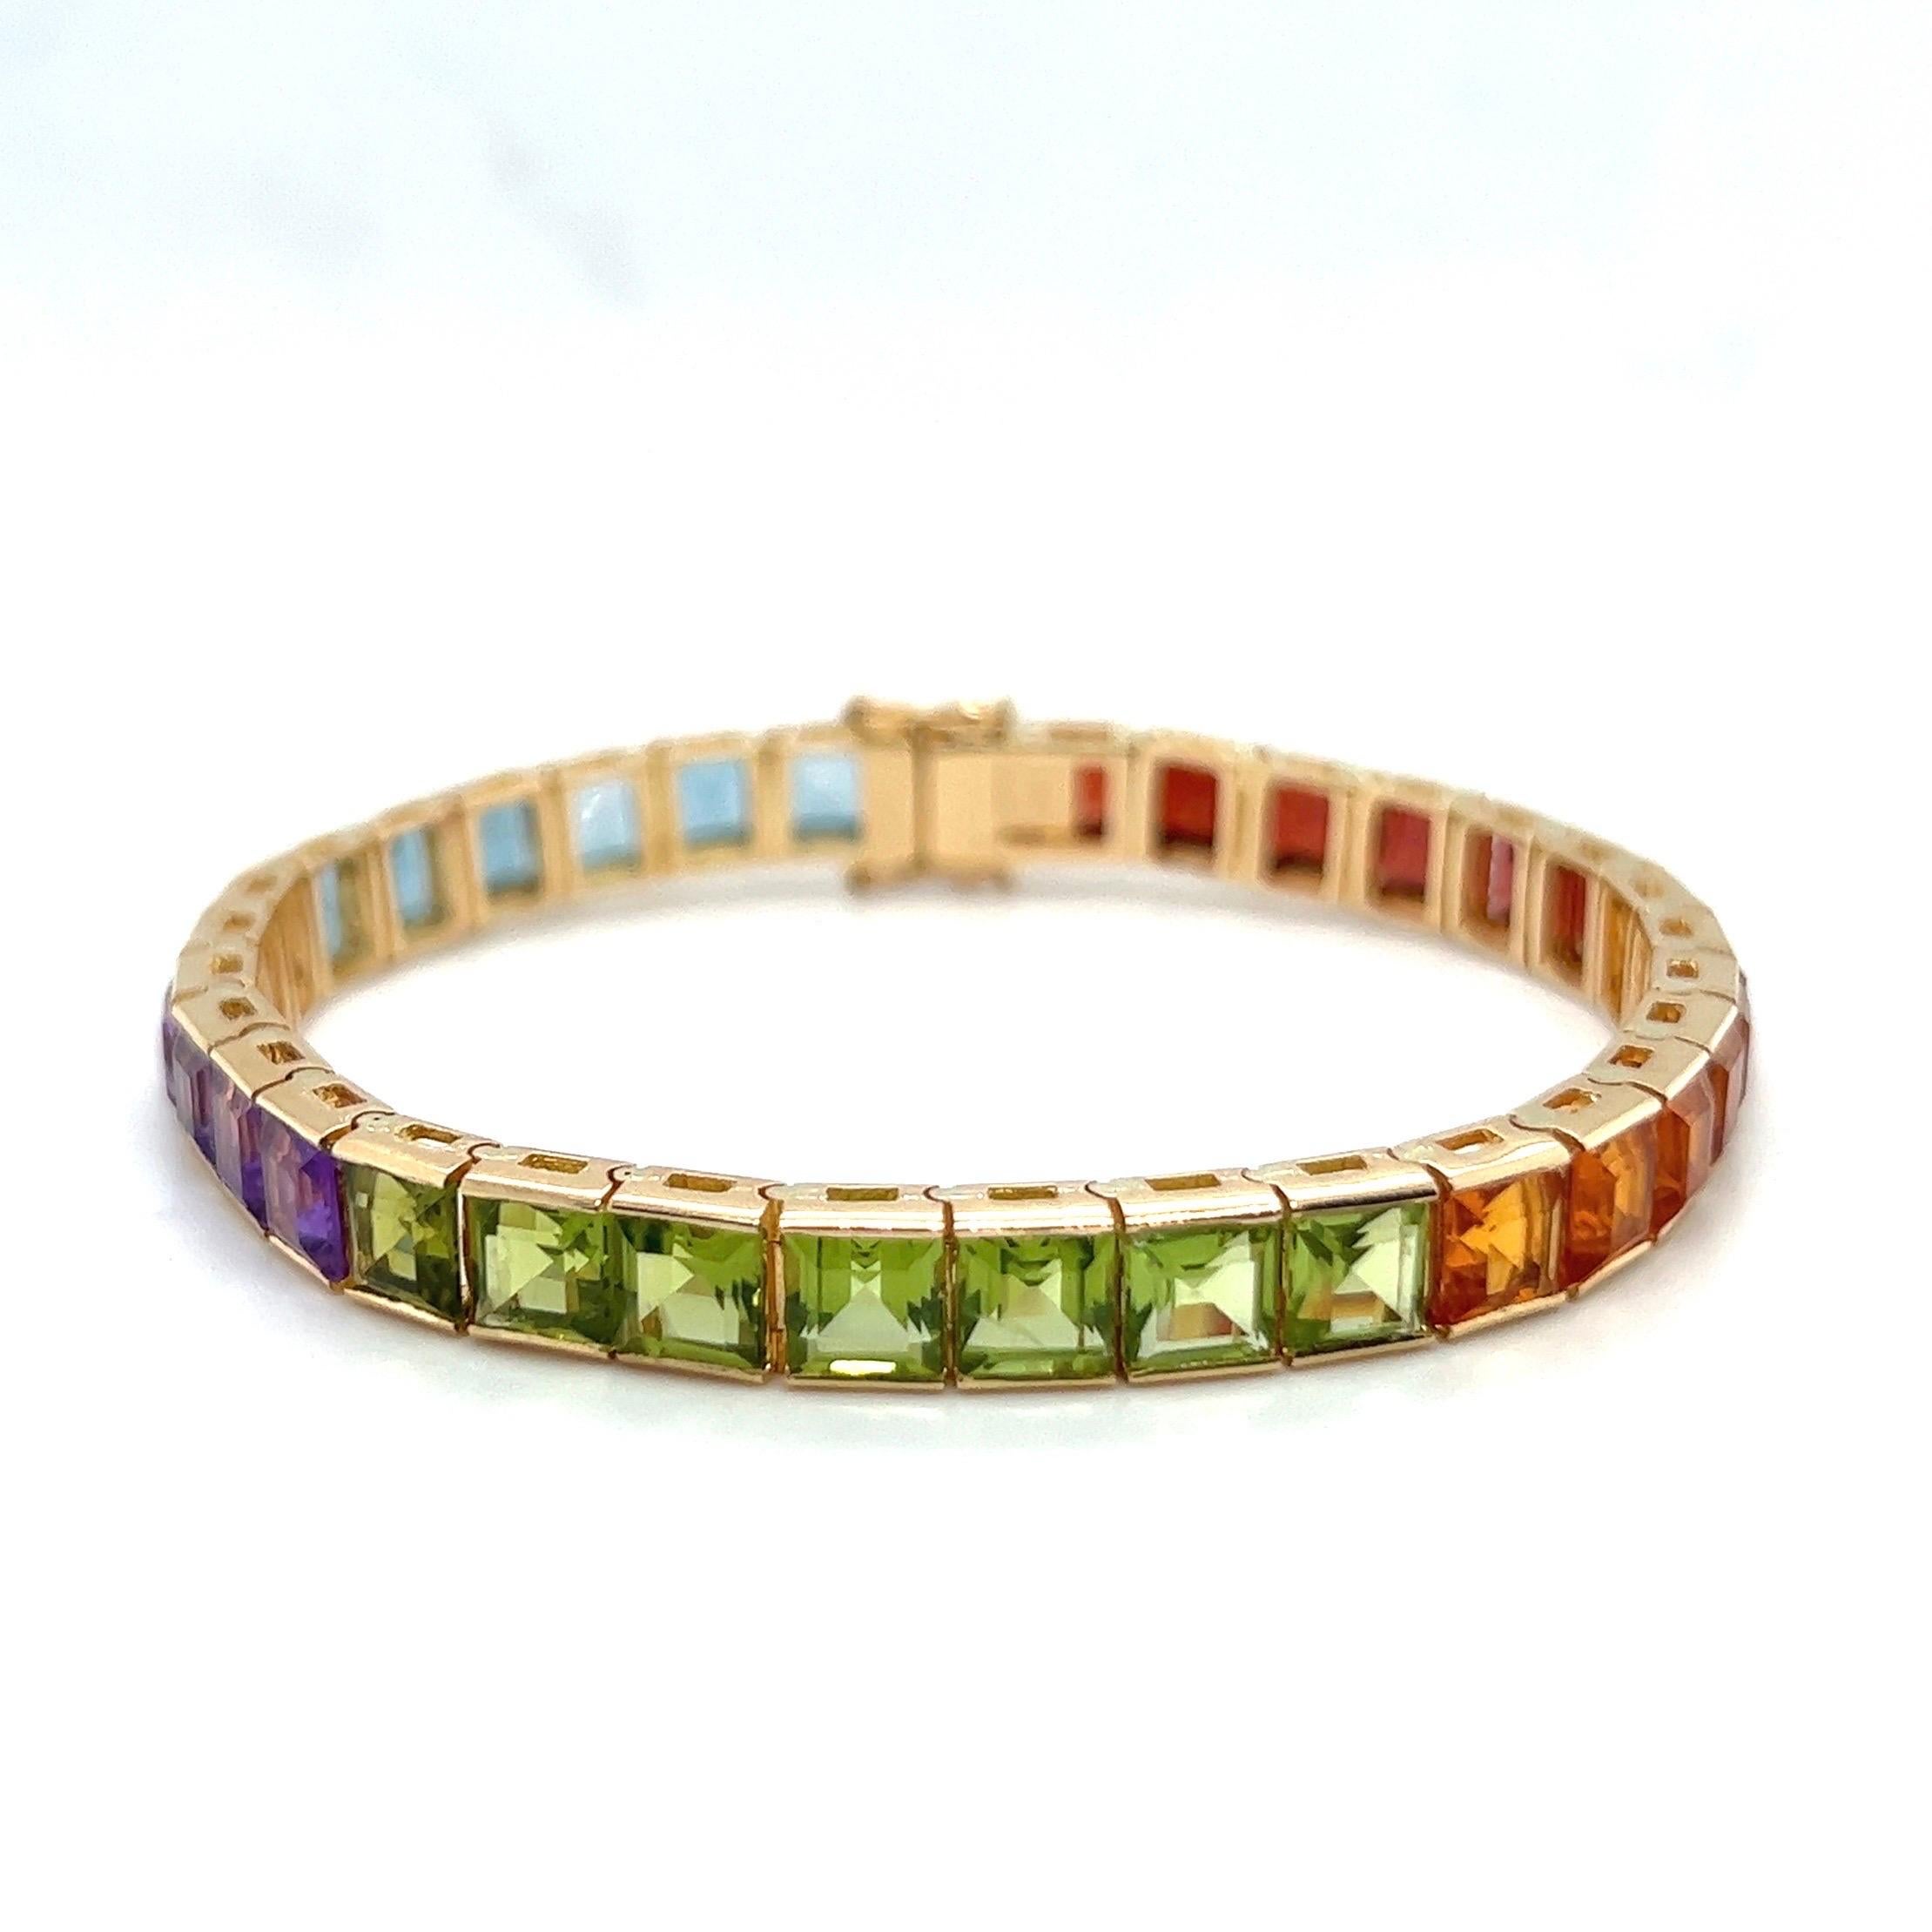 Sporty eye-catching 14 karat yellow gold and colored gemstones rainbow bracelet.

Rivière bracelet crafted in 14 karat yellow gold, designed as a line of 33 coloured gemstone carrés such as aquamarine, amethyst, peridot, citrine, red garnet and